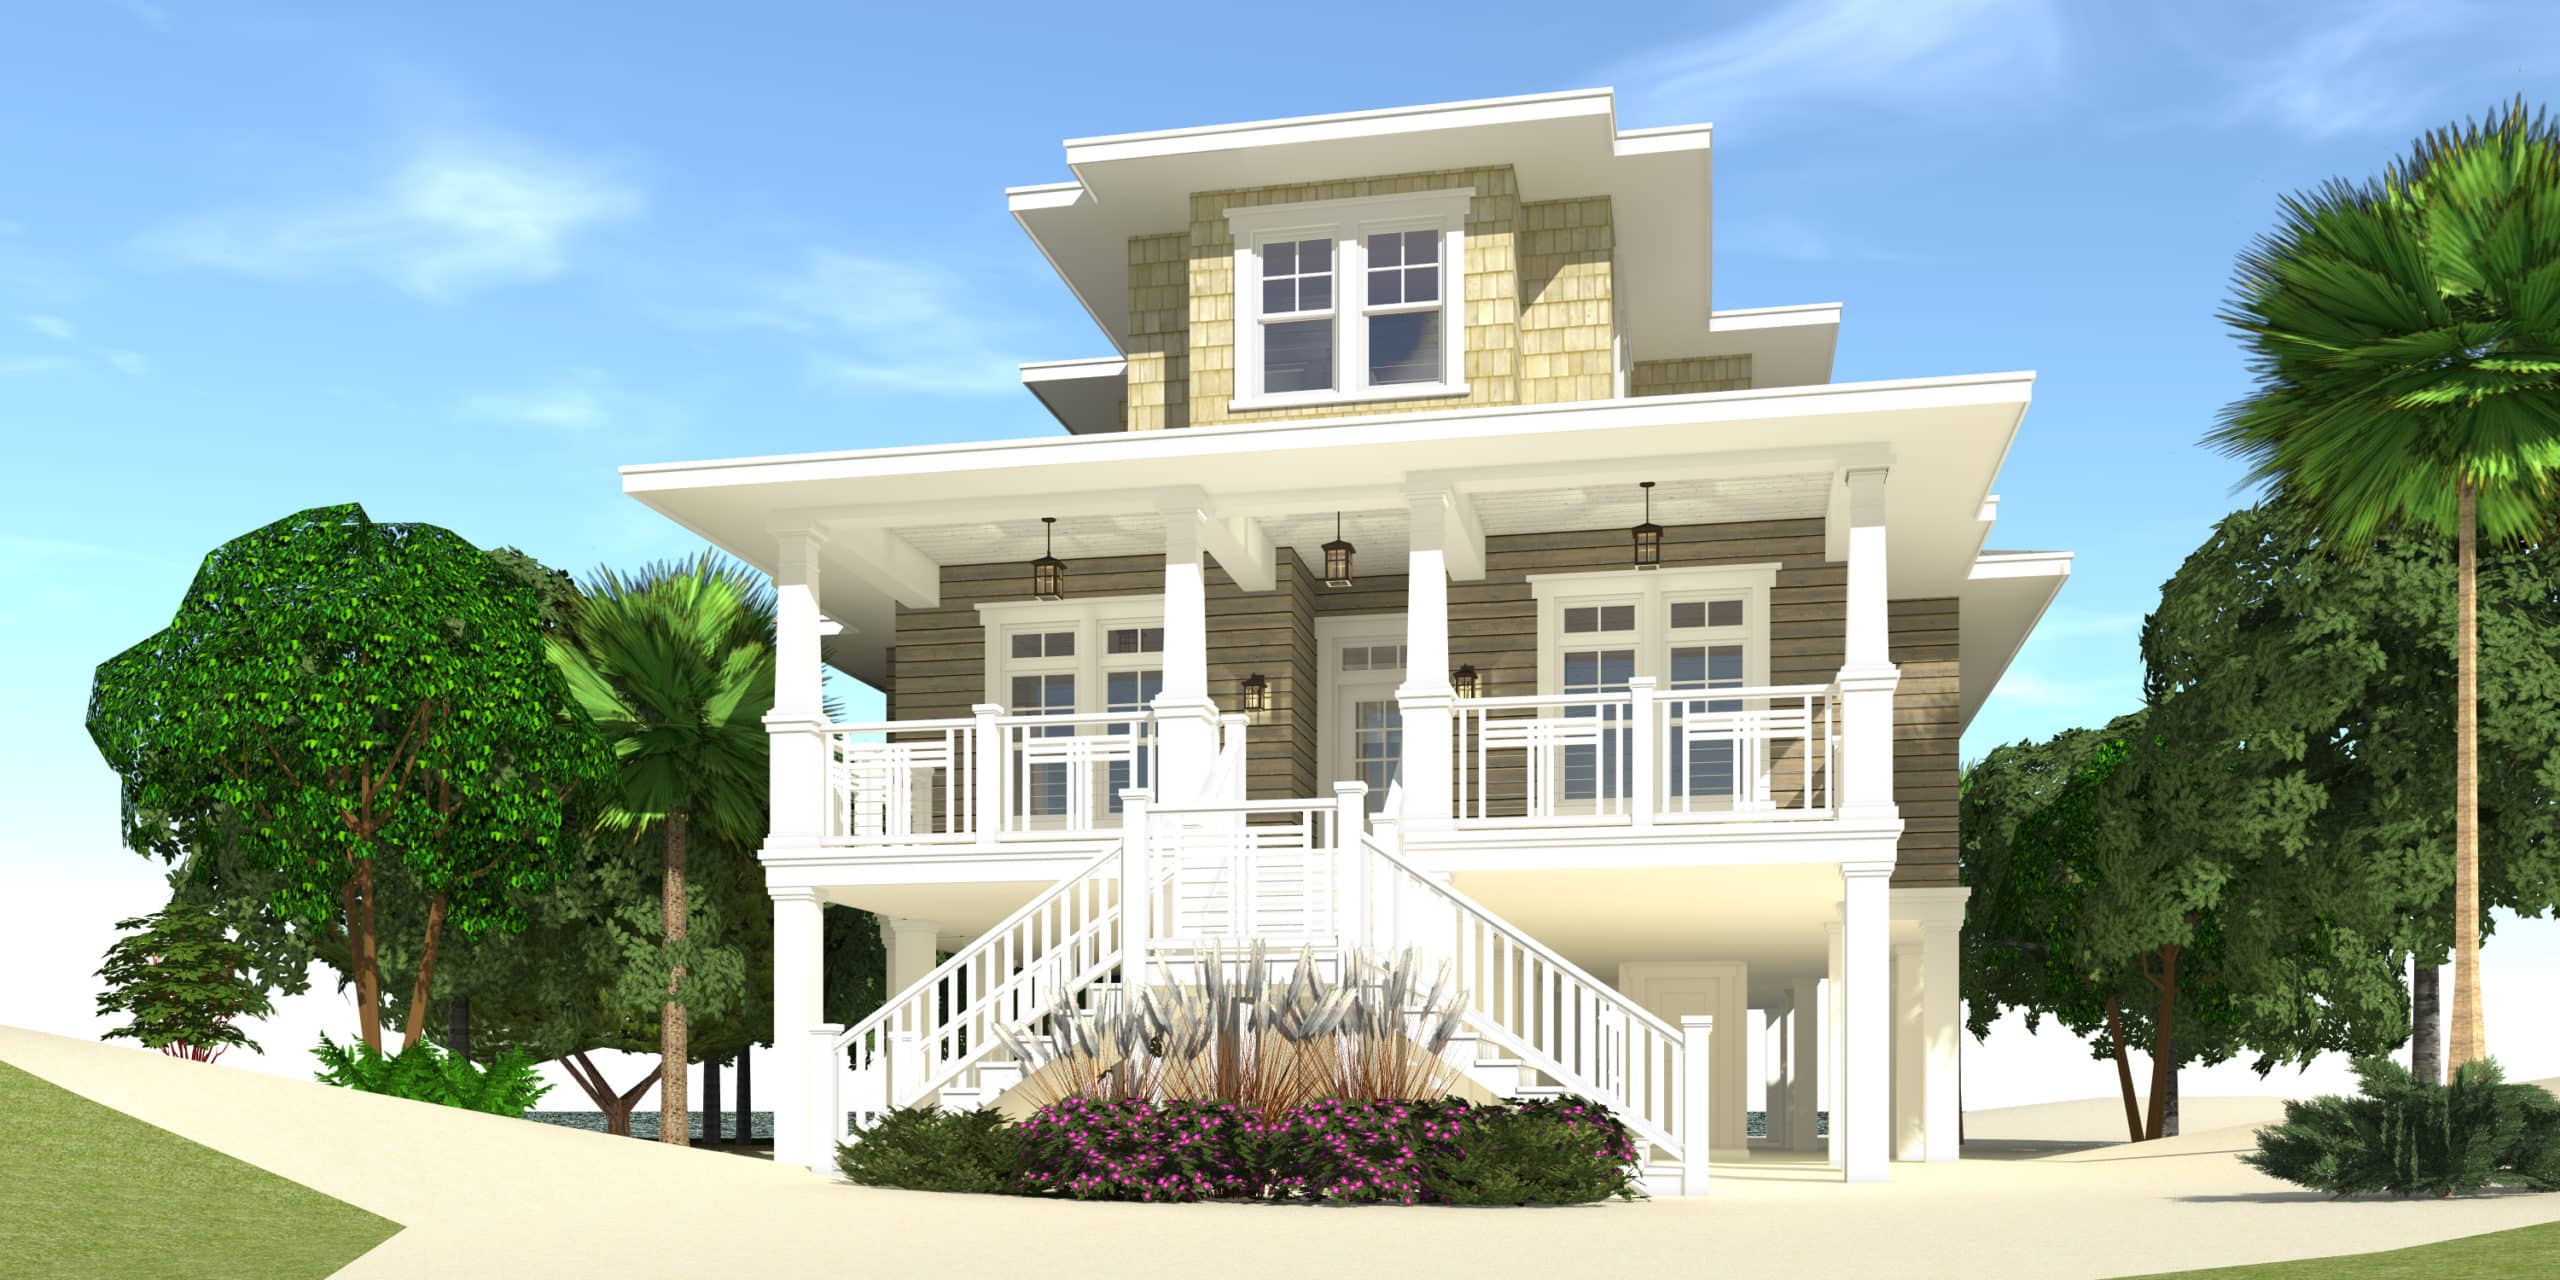 Front view. Fenton by Tyree House Plans.